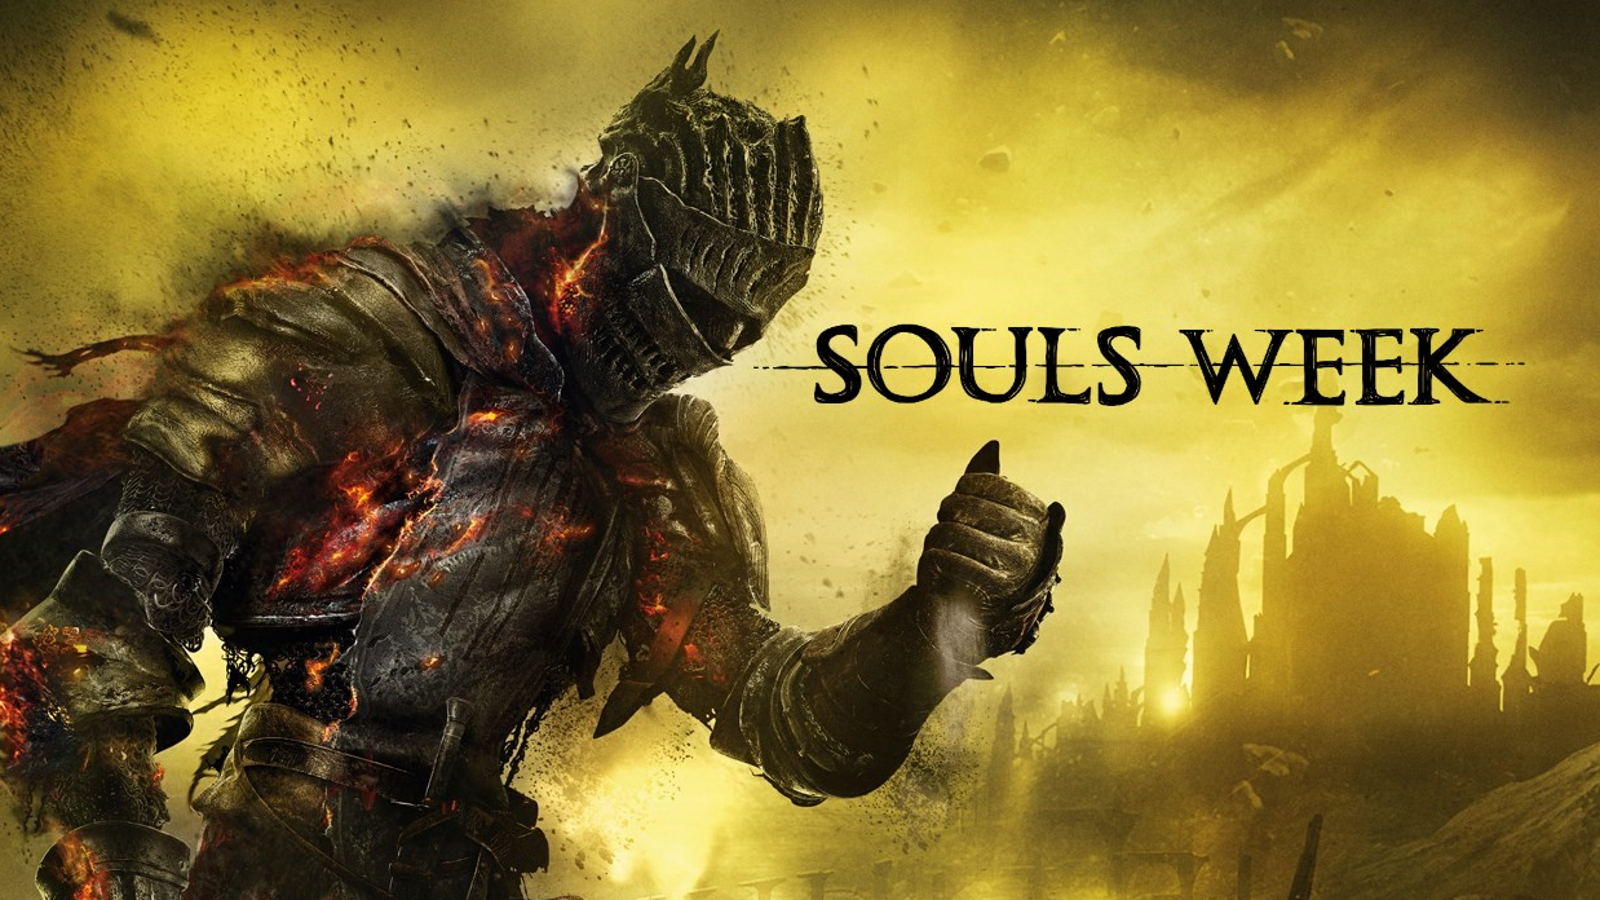 What you need to know before playing Dark Souls III